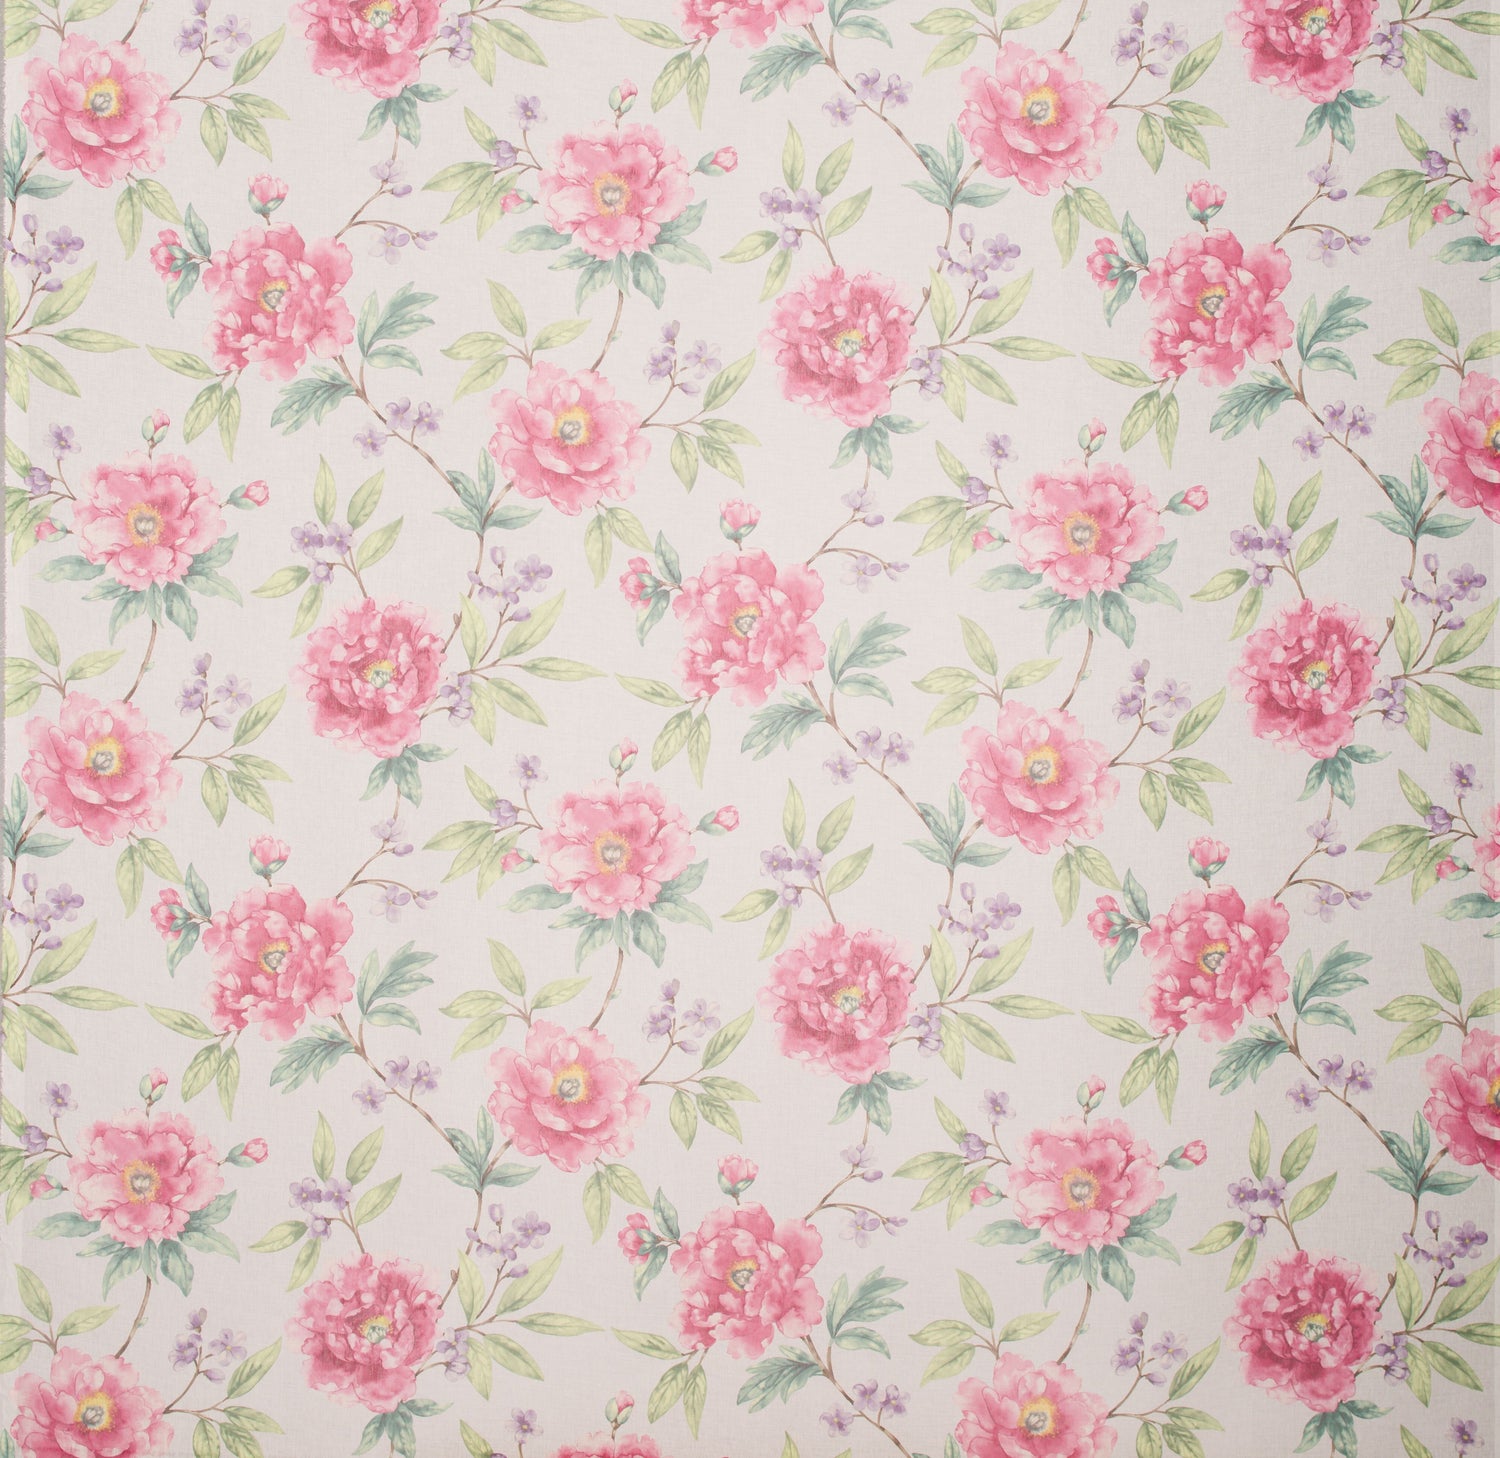 Rose Arbor fabric in petal color - pattern number HH 0001S806 - by Scalamandre in the Old World Weavers collection